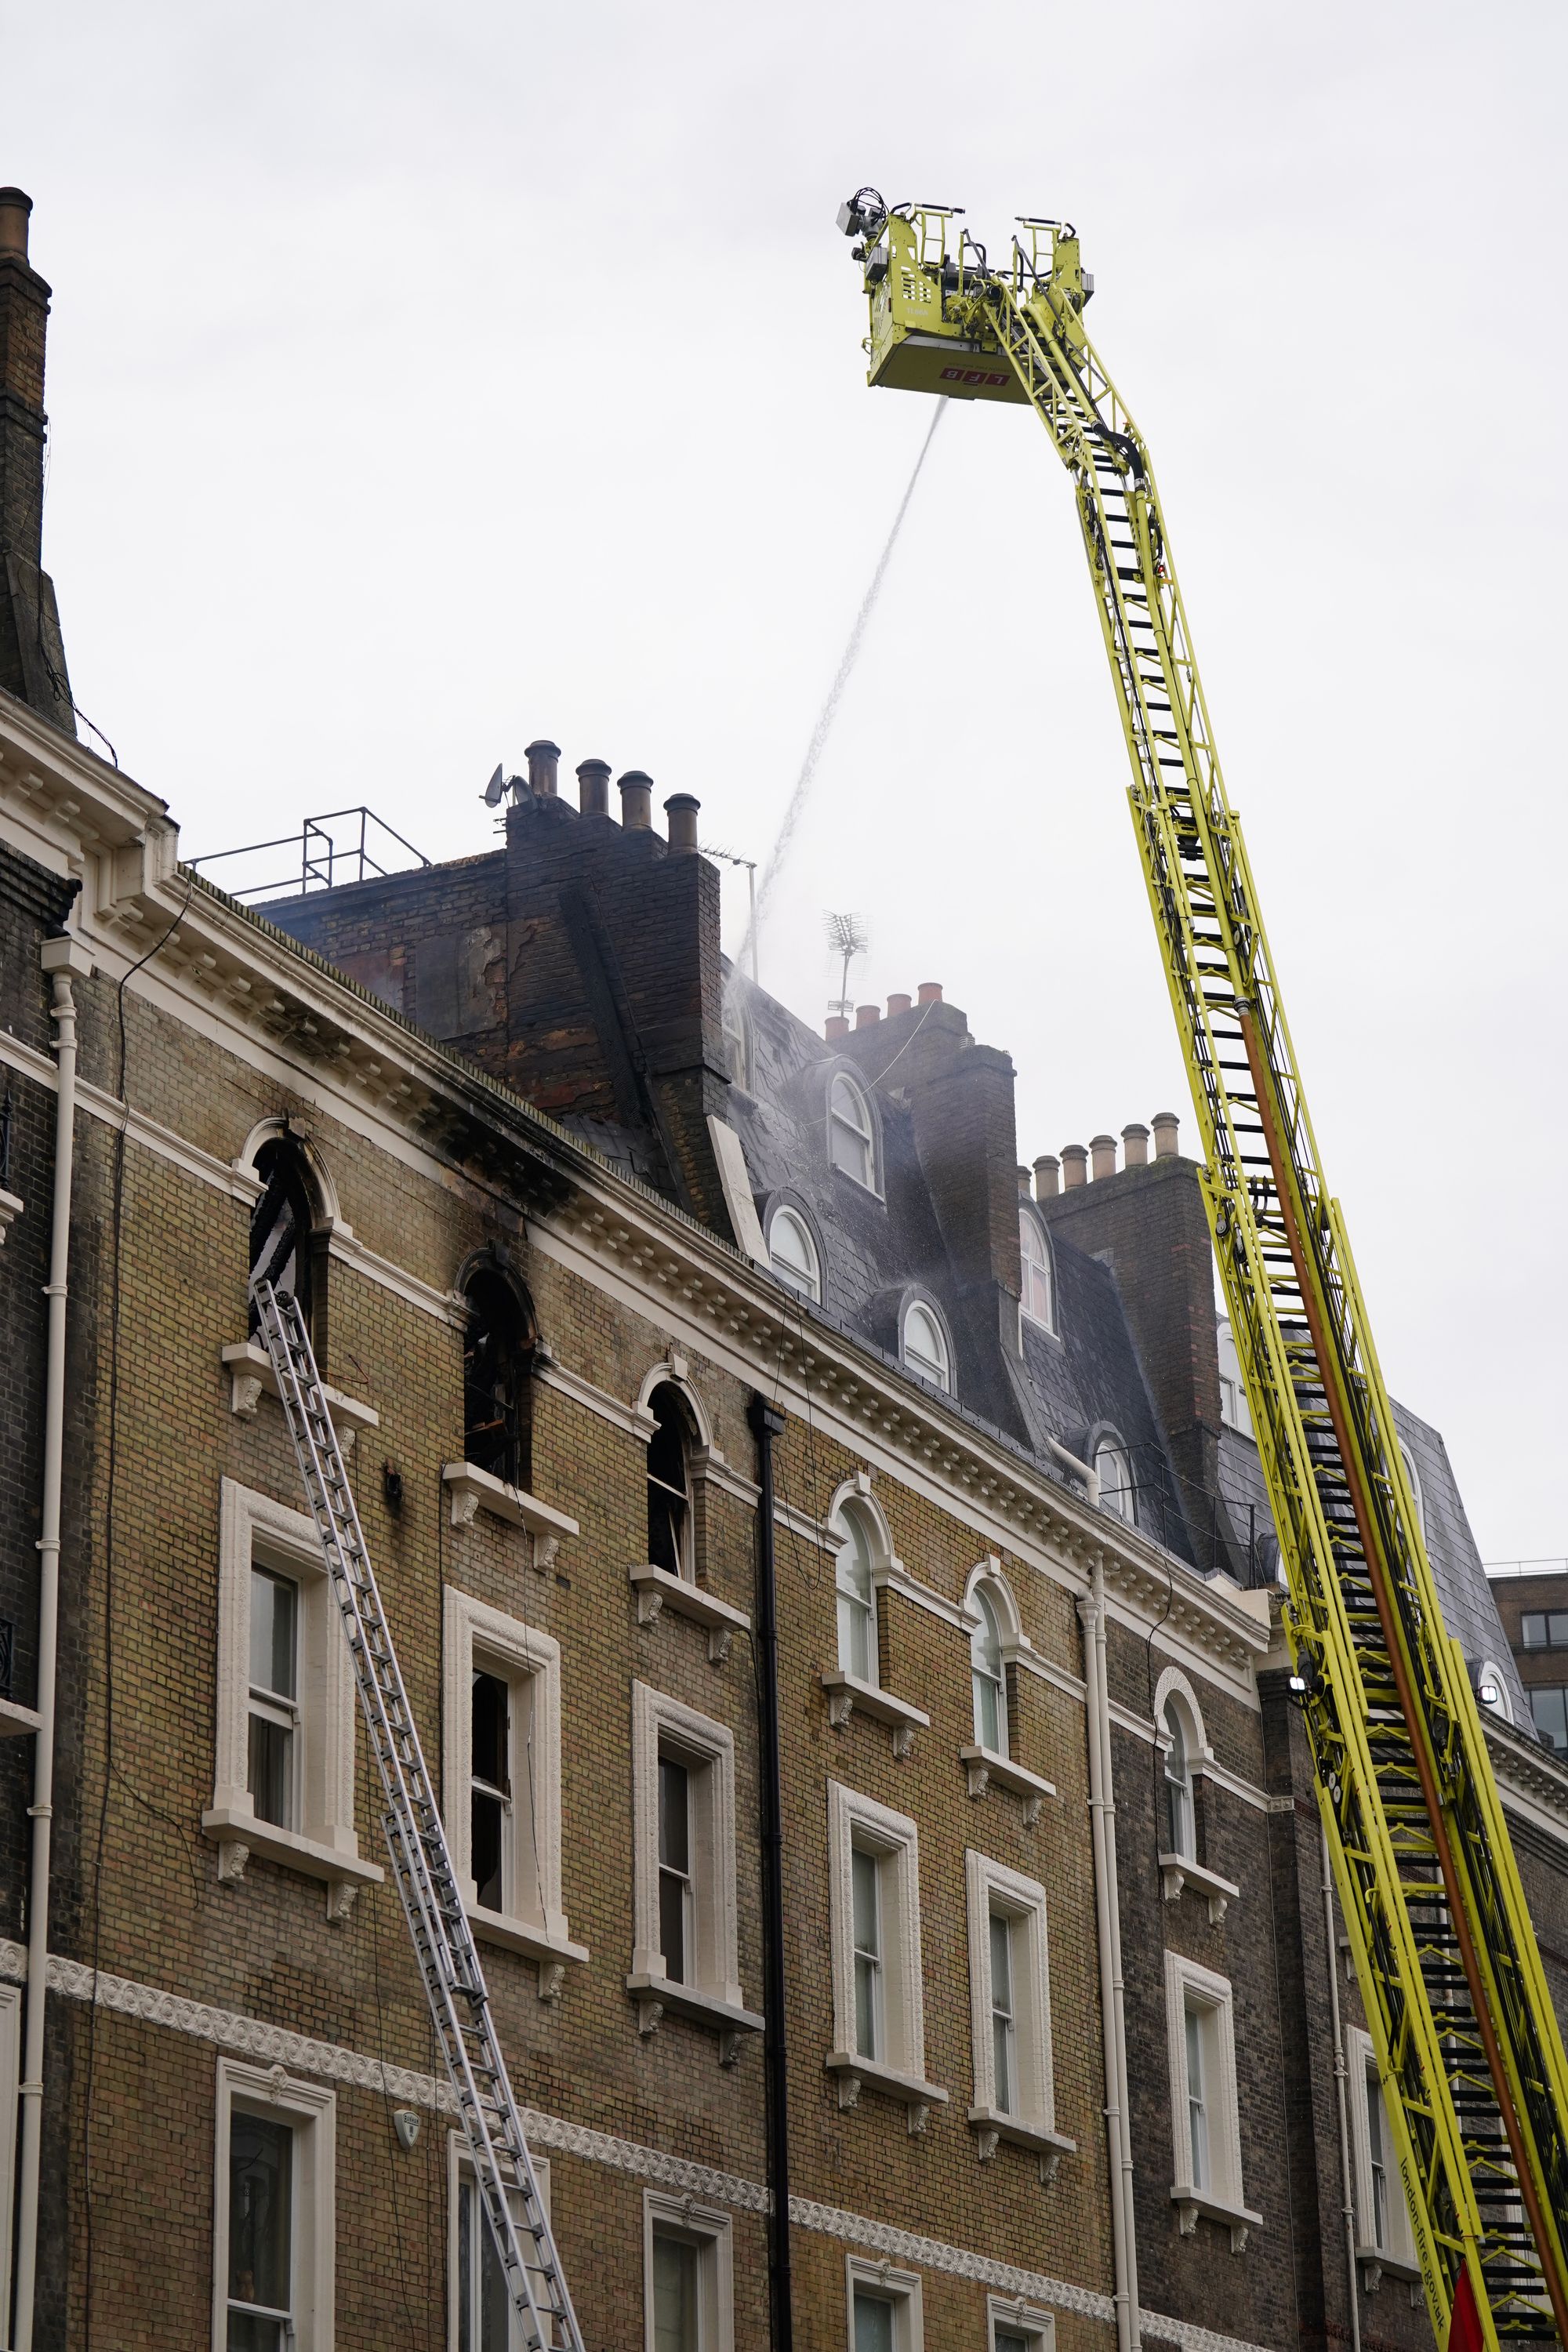 south kensington fire: residents 'run for their lives' as blaze breaks out in five-storey building with 11 taken to hospital